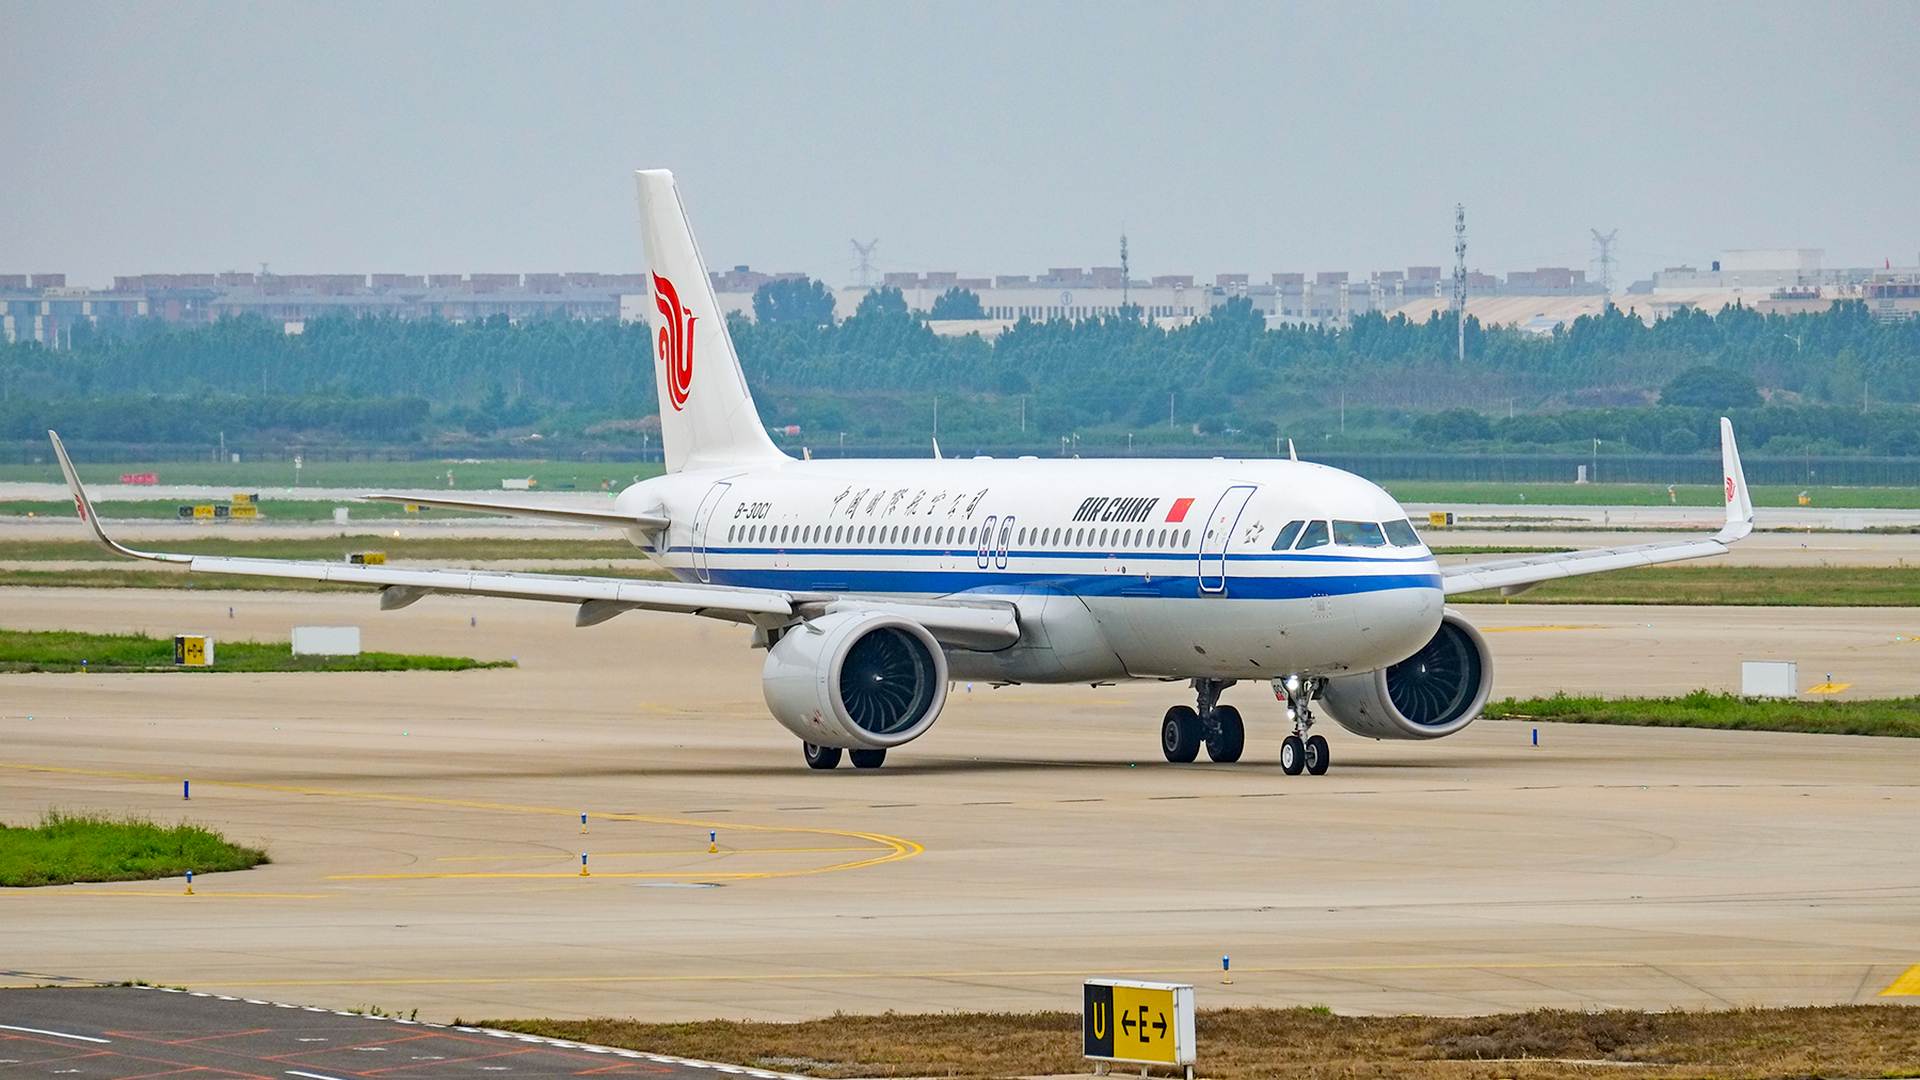 Accident: Air China A320neo Runway Evacuation and Engine Fire?